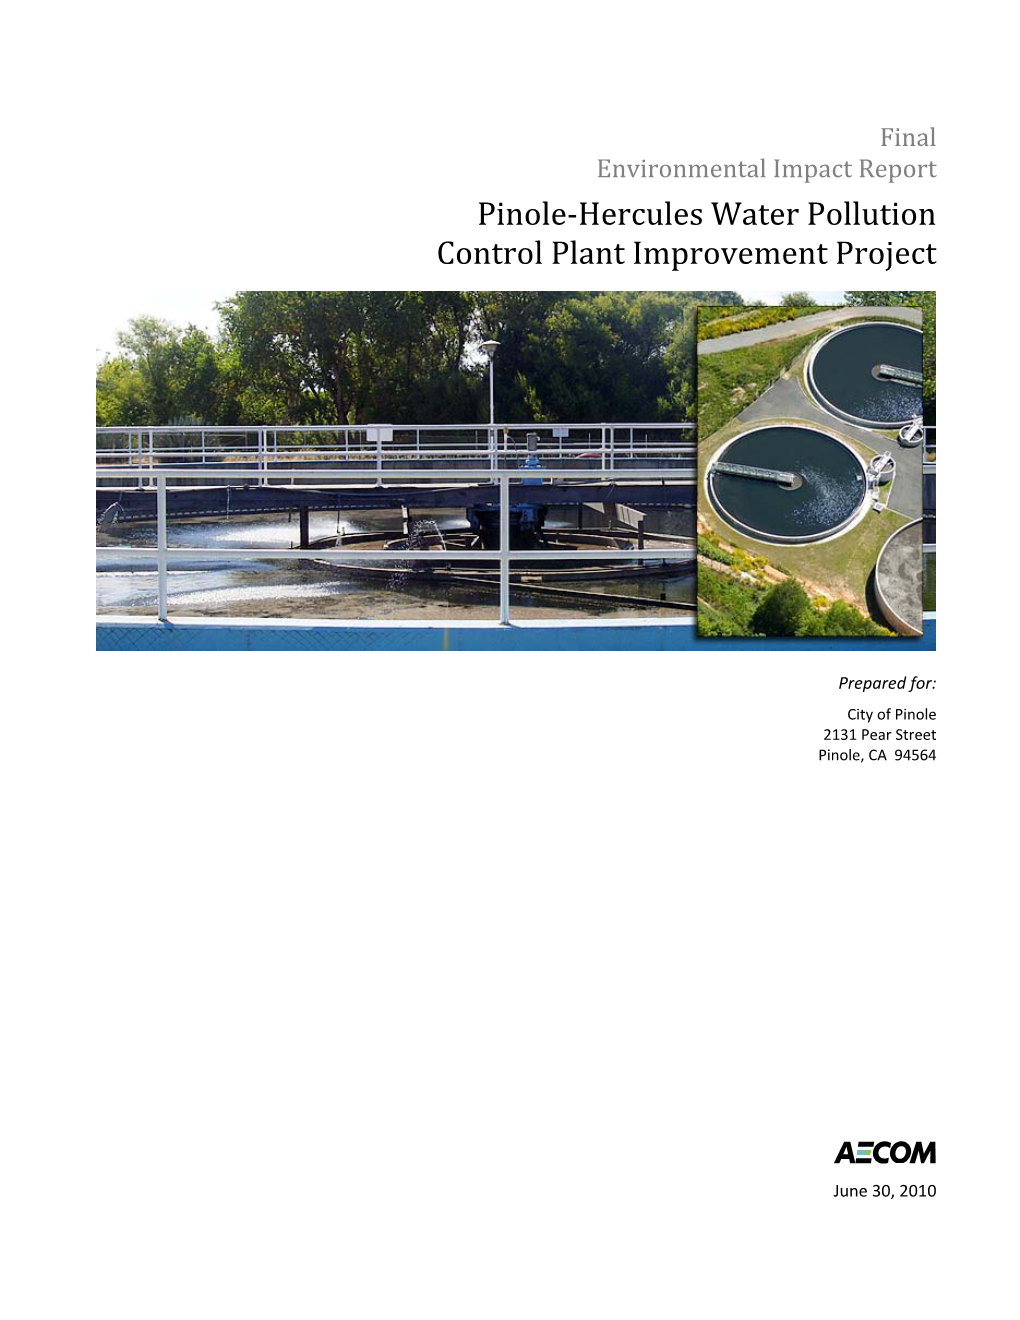 Pinole‐Hercules Water Pollution Control Plant Improvement Project